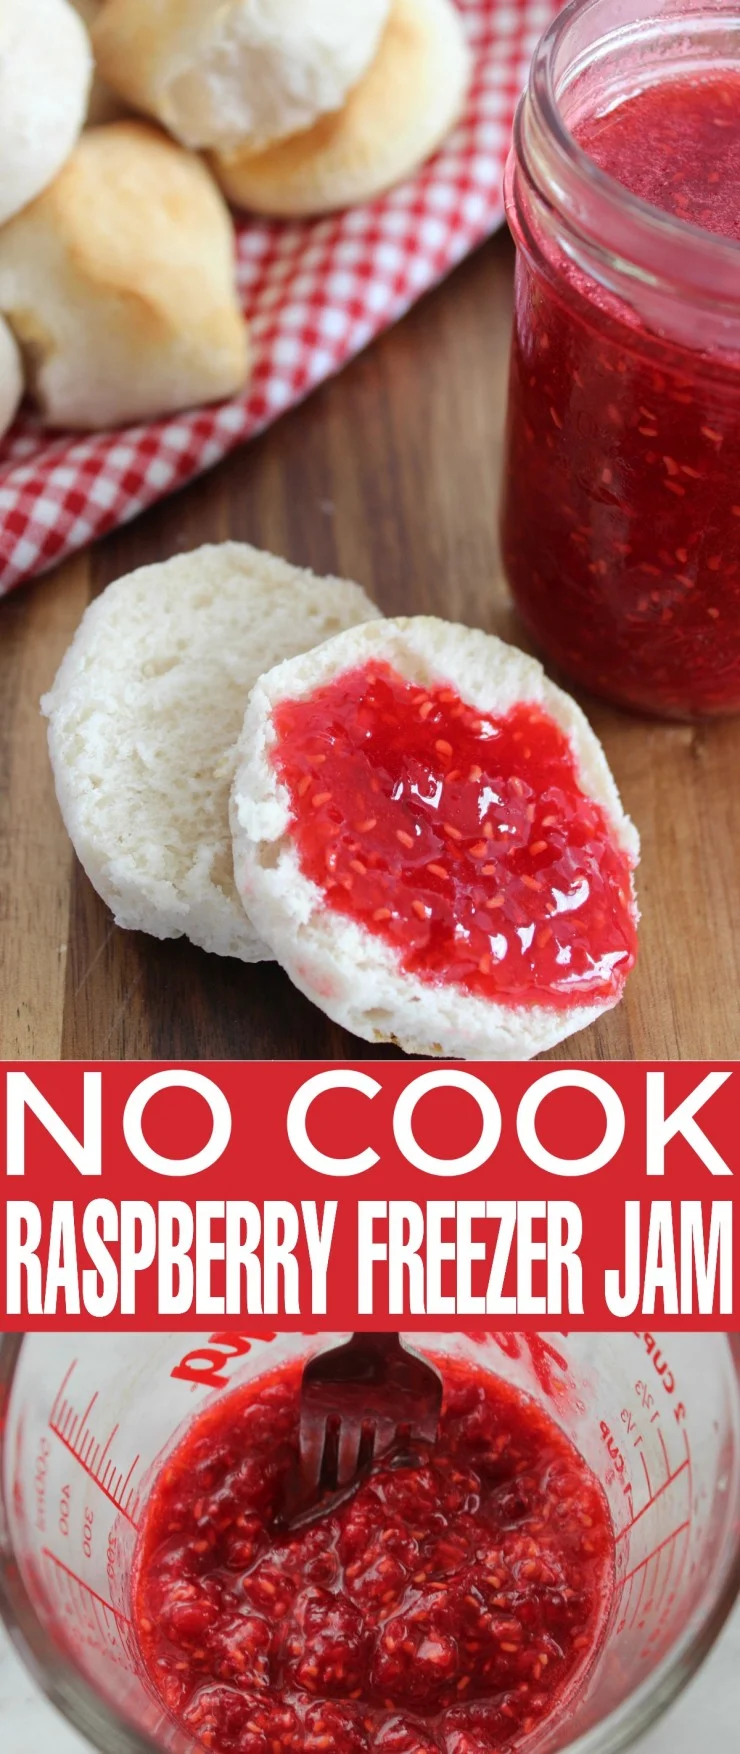 This No Cook Raspberry Freezer Jam is the perfect way to presrve those amazing summer berries.